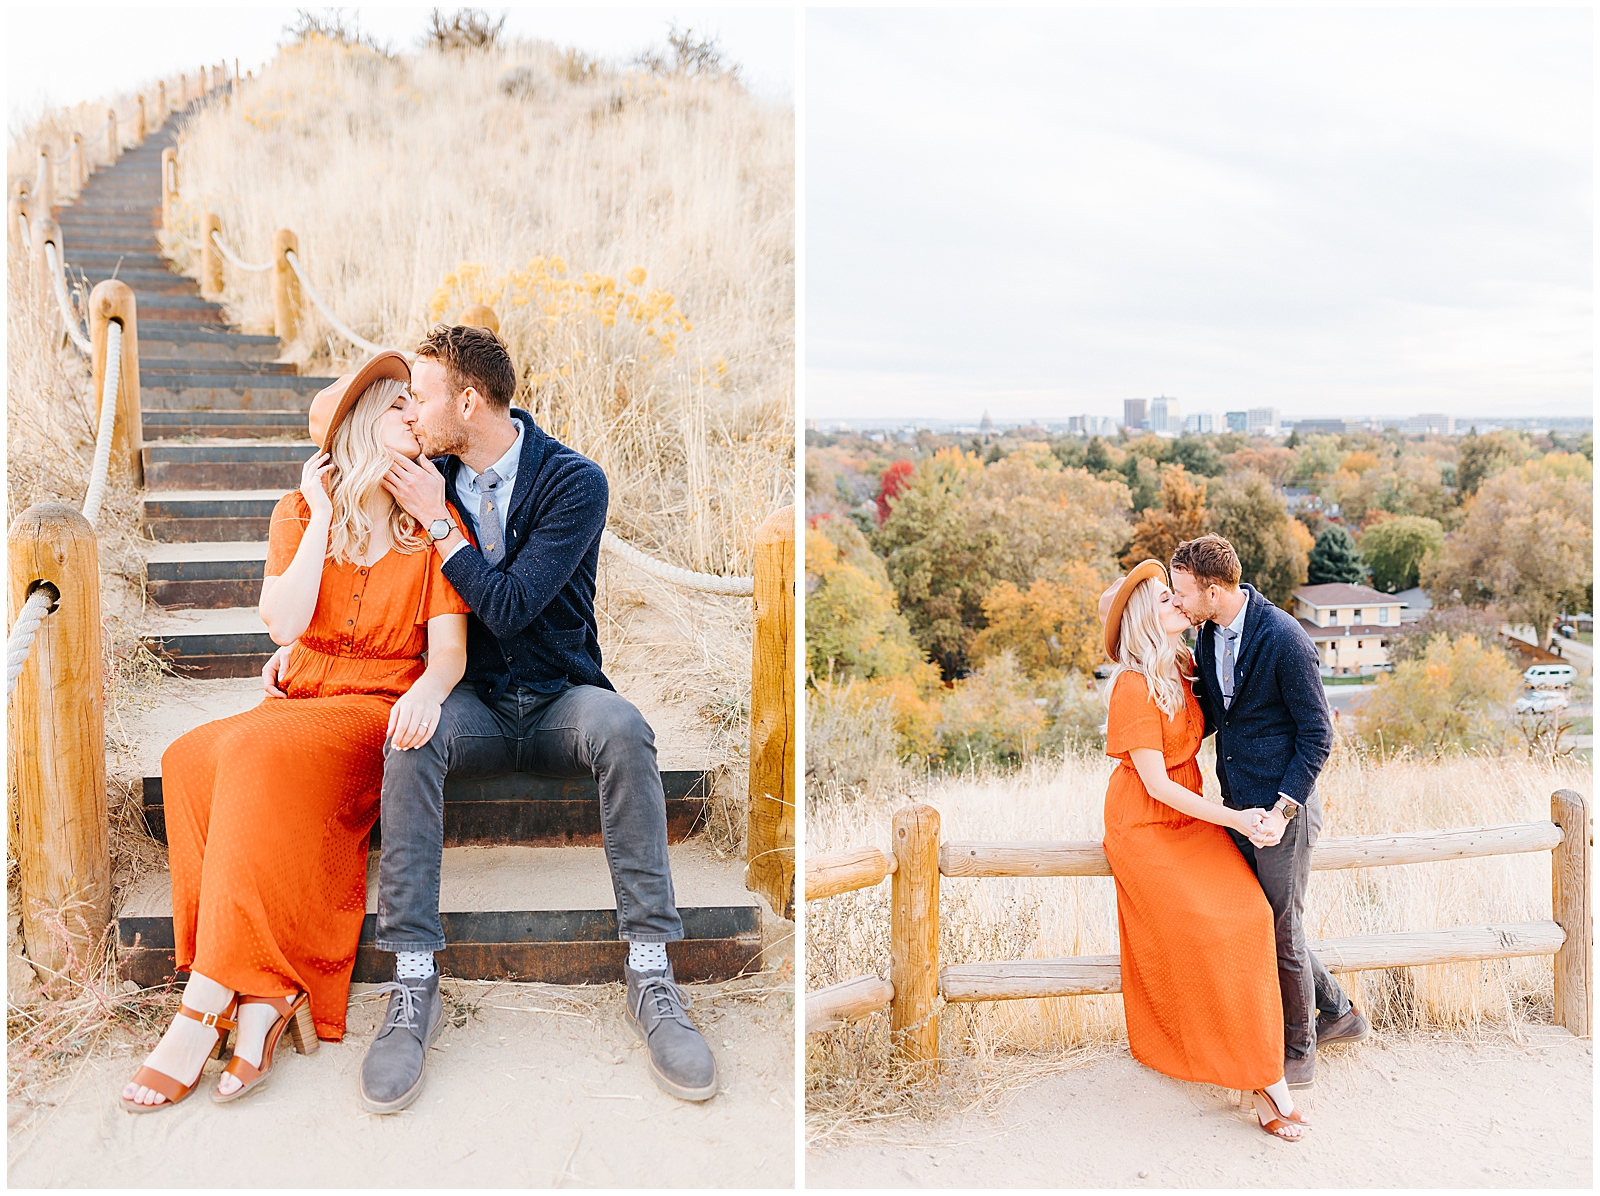 Dreamy October Fall Engagement Photos in foothills of Boise Idaho